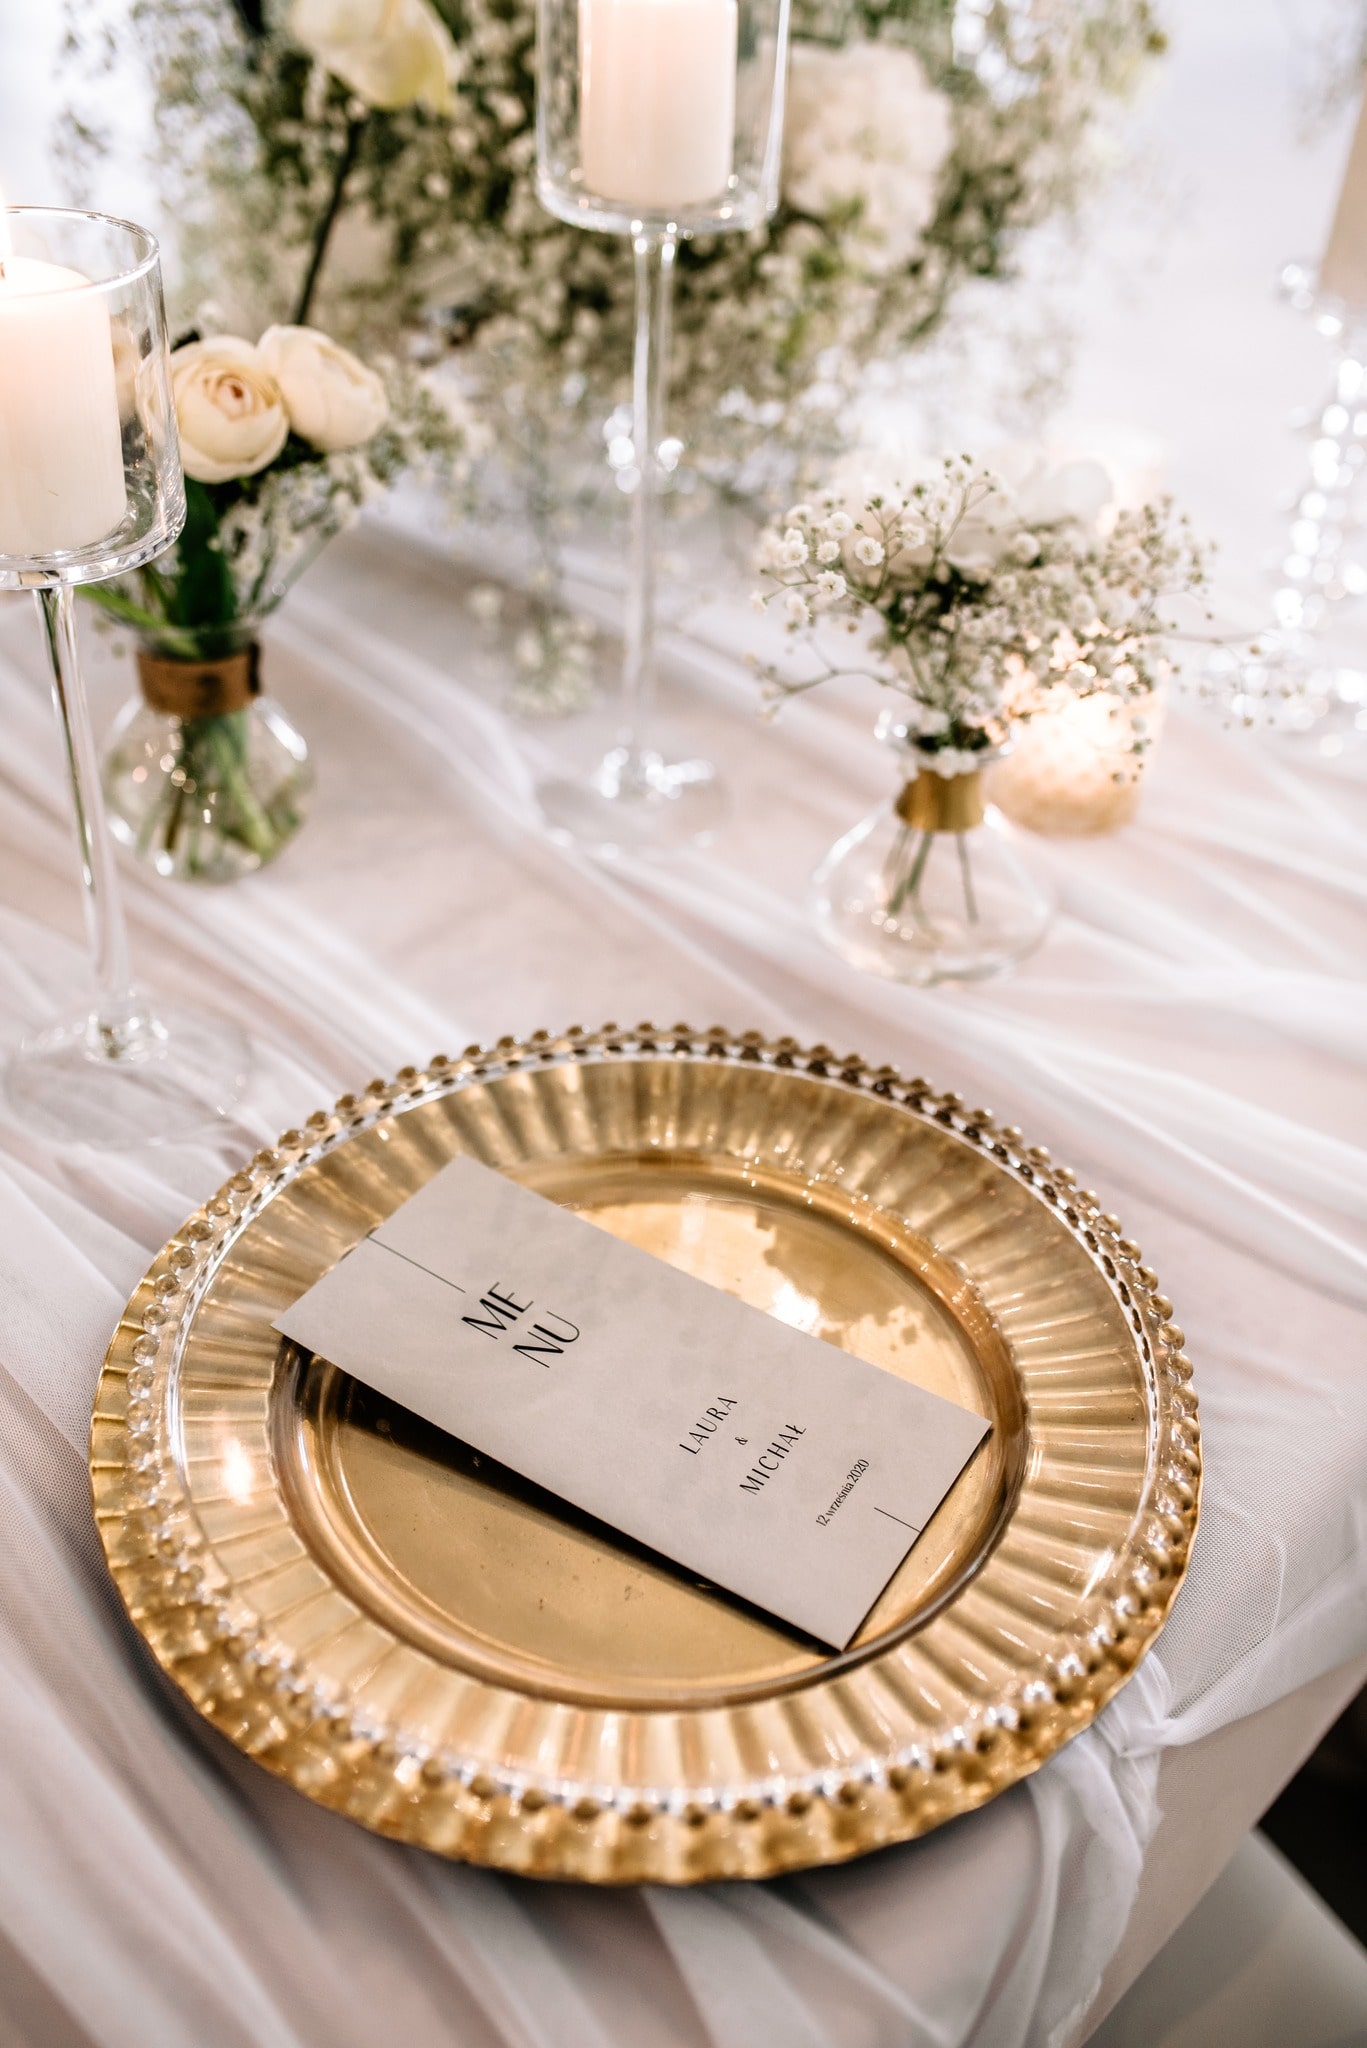 A golden plate on a wedding table